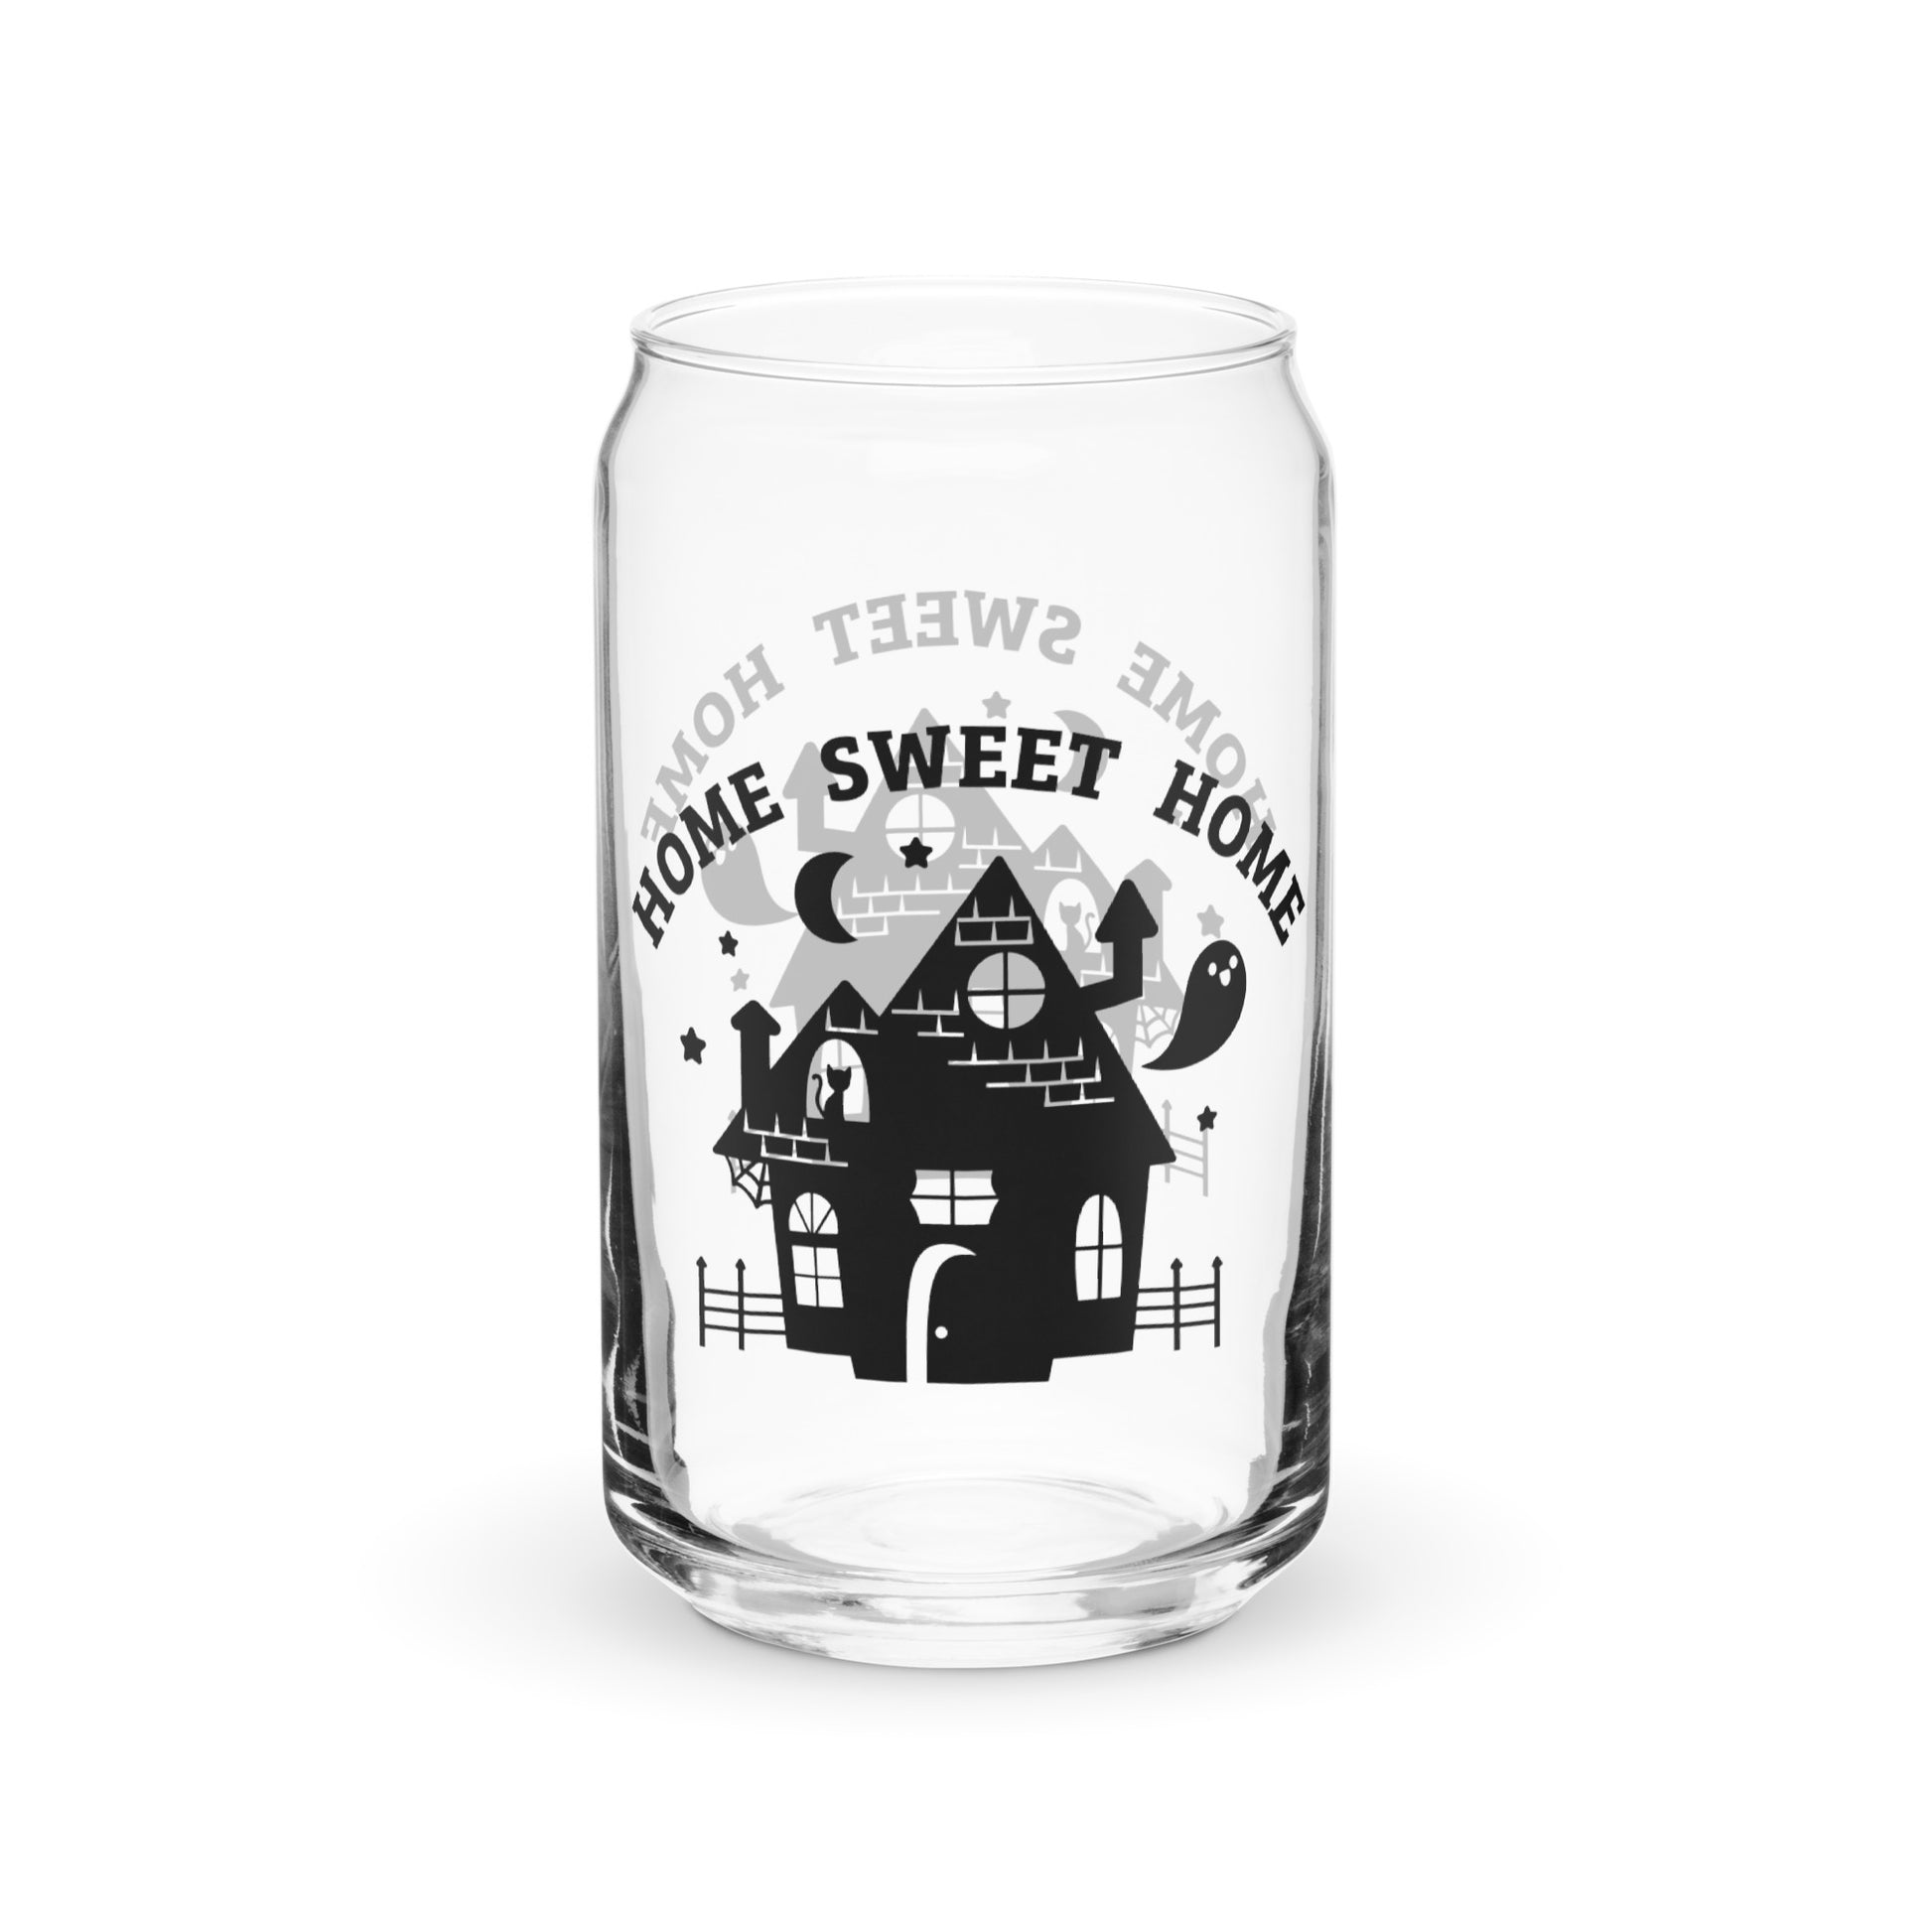 A 16 ounce glass can featuring a black silhouette of a haunted house. Text above the house in an arc reads "Home Sweet Home"